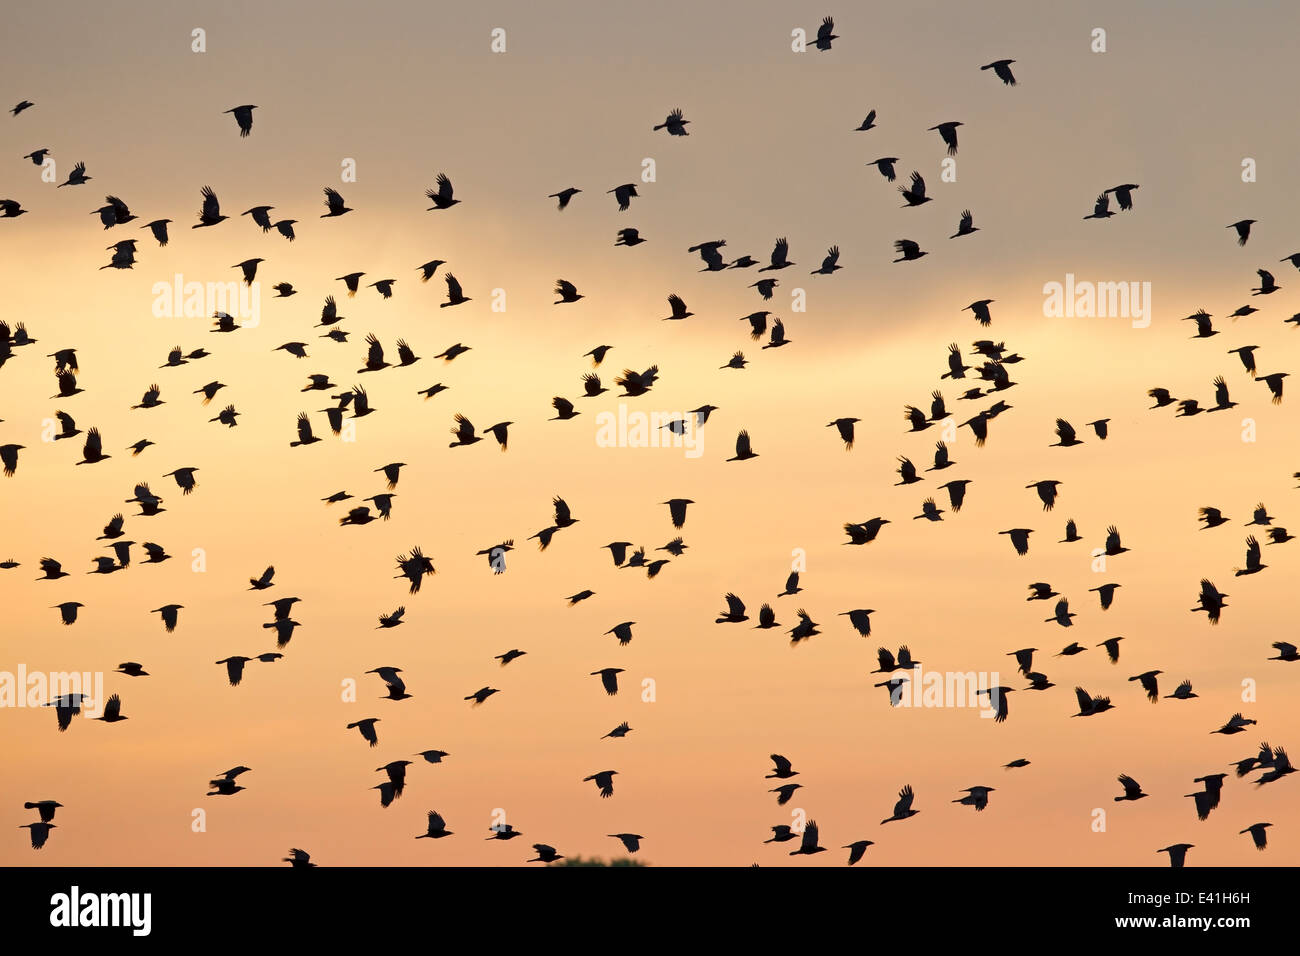 Flying crows against the background of sunset sky, Netherlands Stock Photo